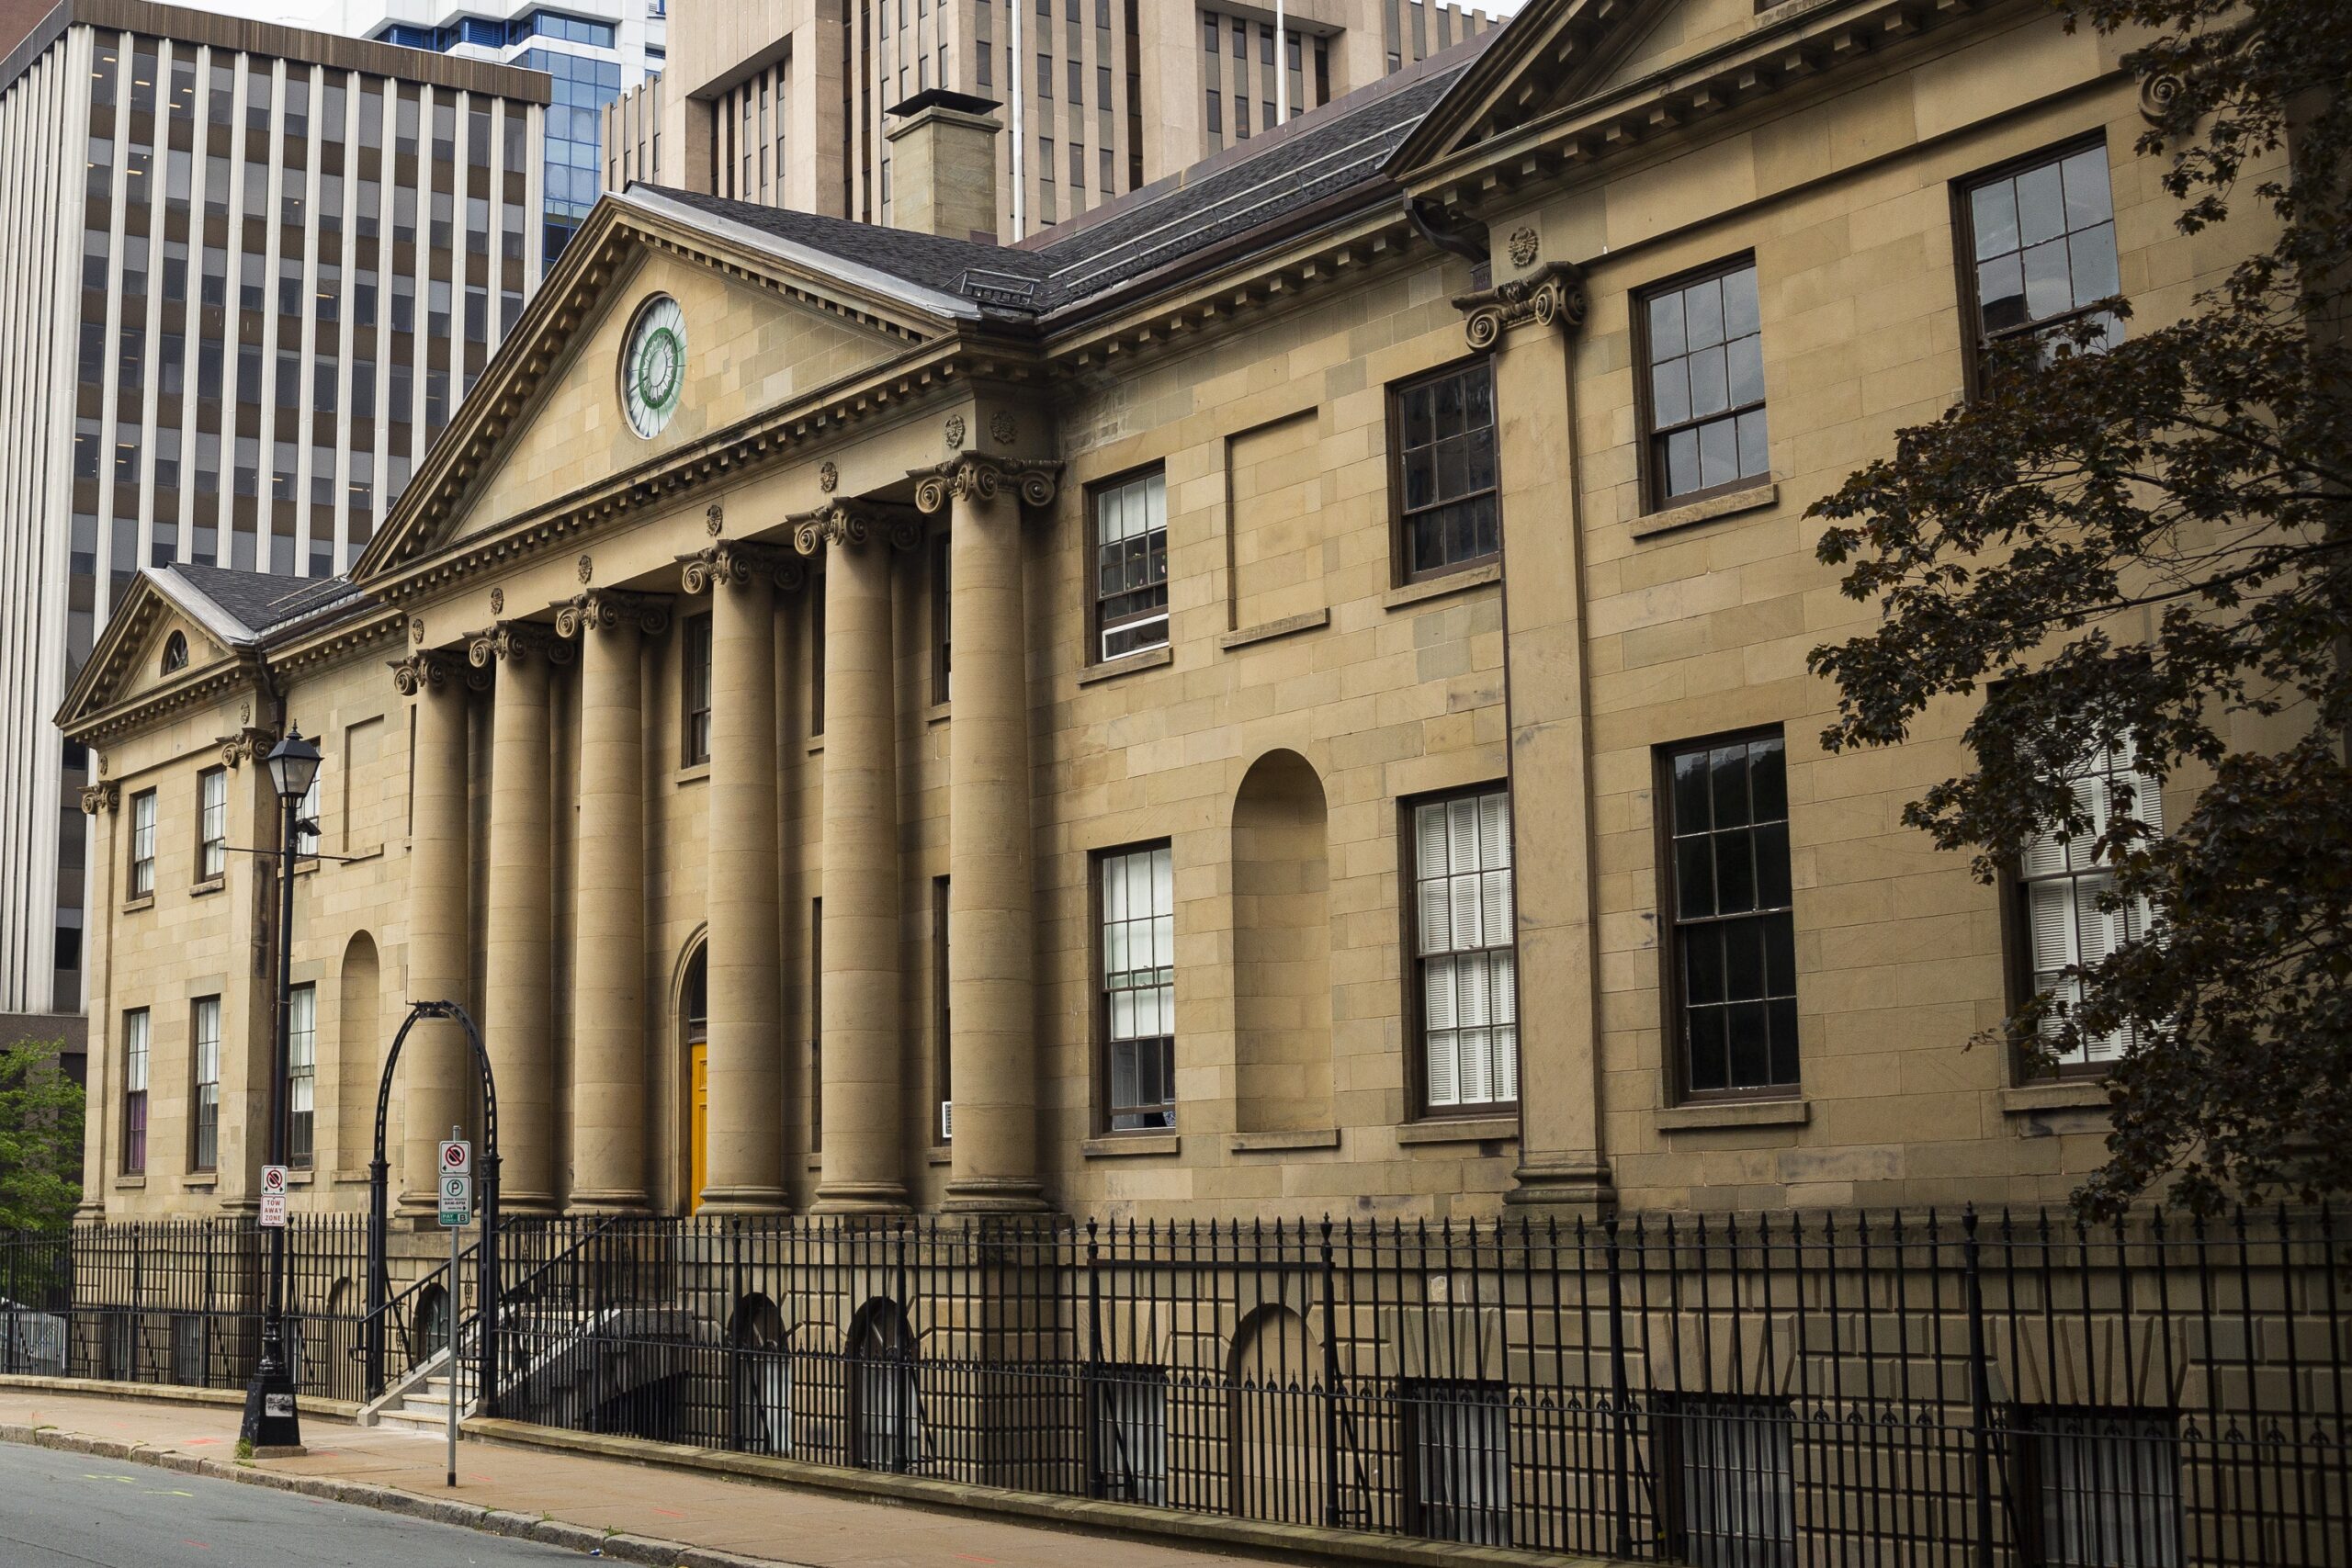 The front of Province House in June 2021. In the front is a very clean sidewalk and wrought iron fence; in the background, rising high above the roofline, are more modern buildings.